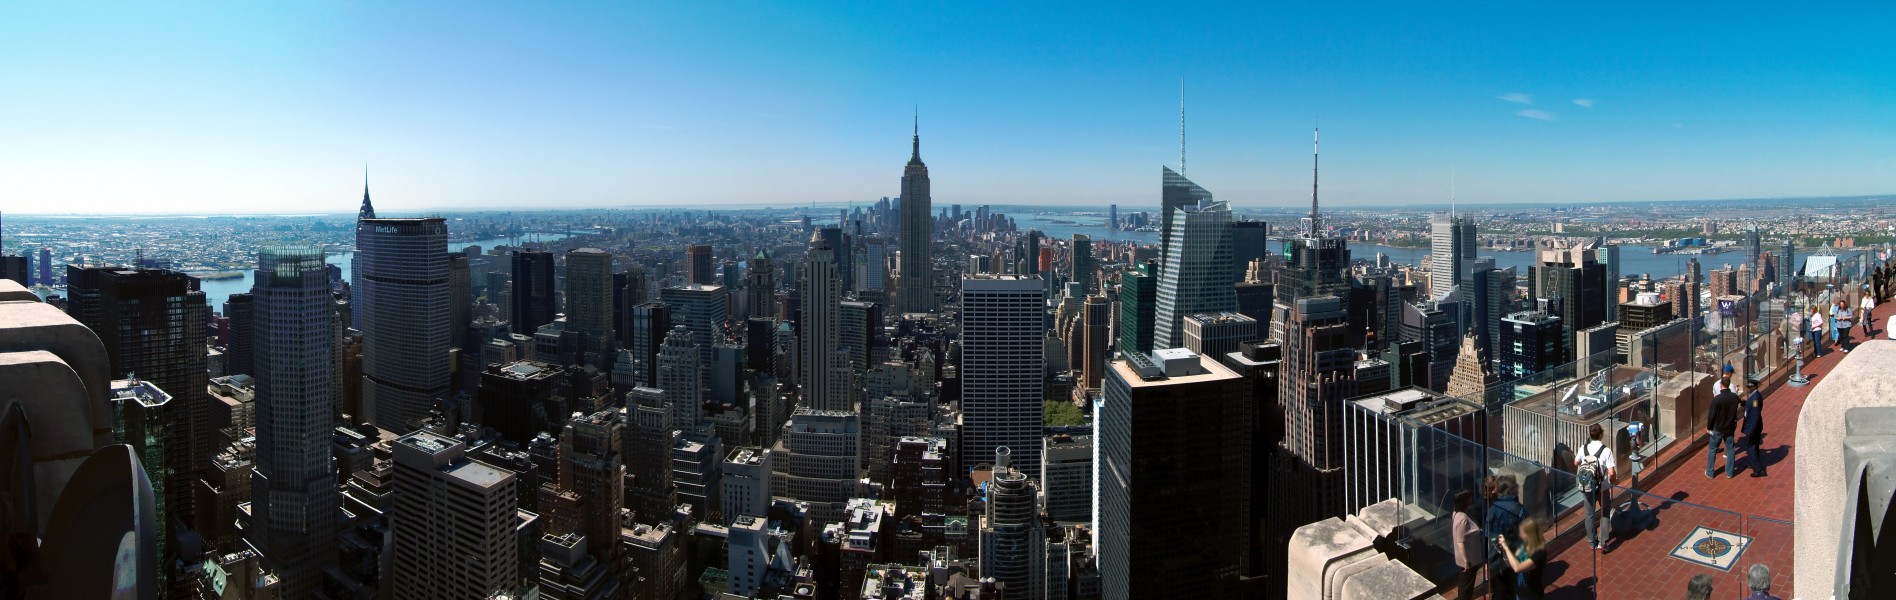 New York- Top of the Rock (4562660251)